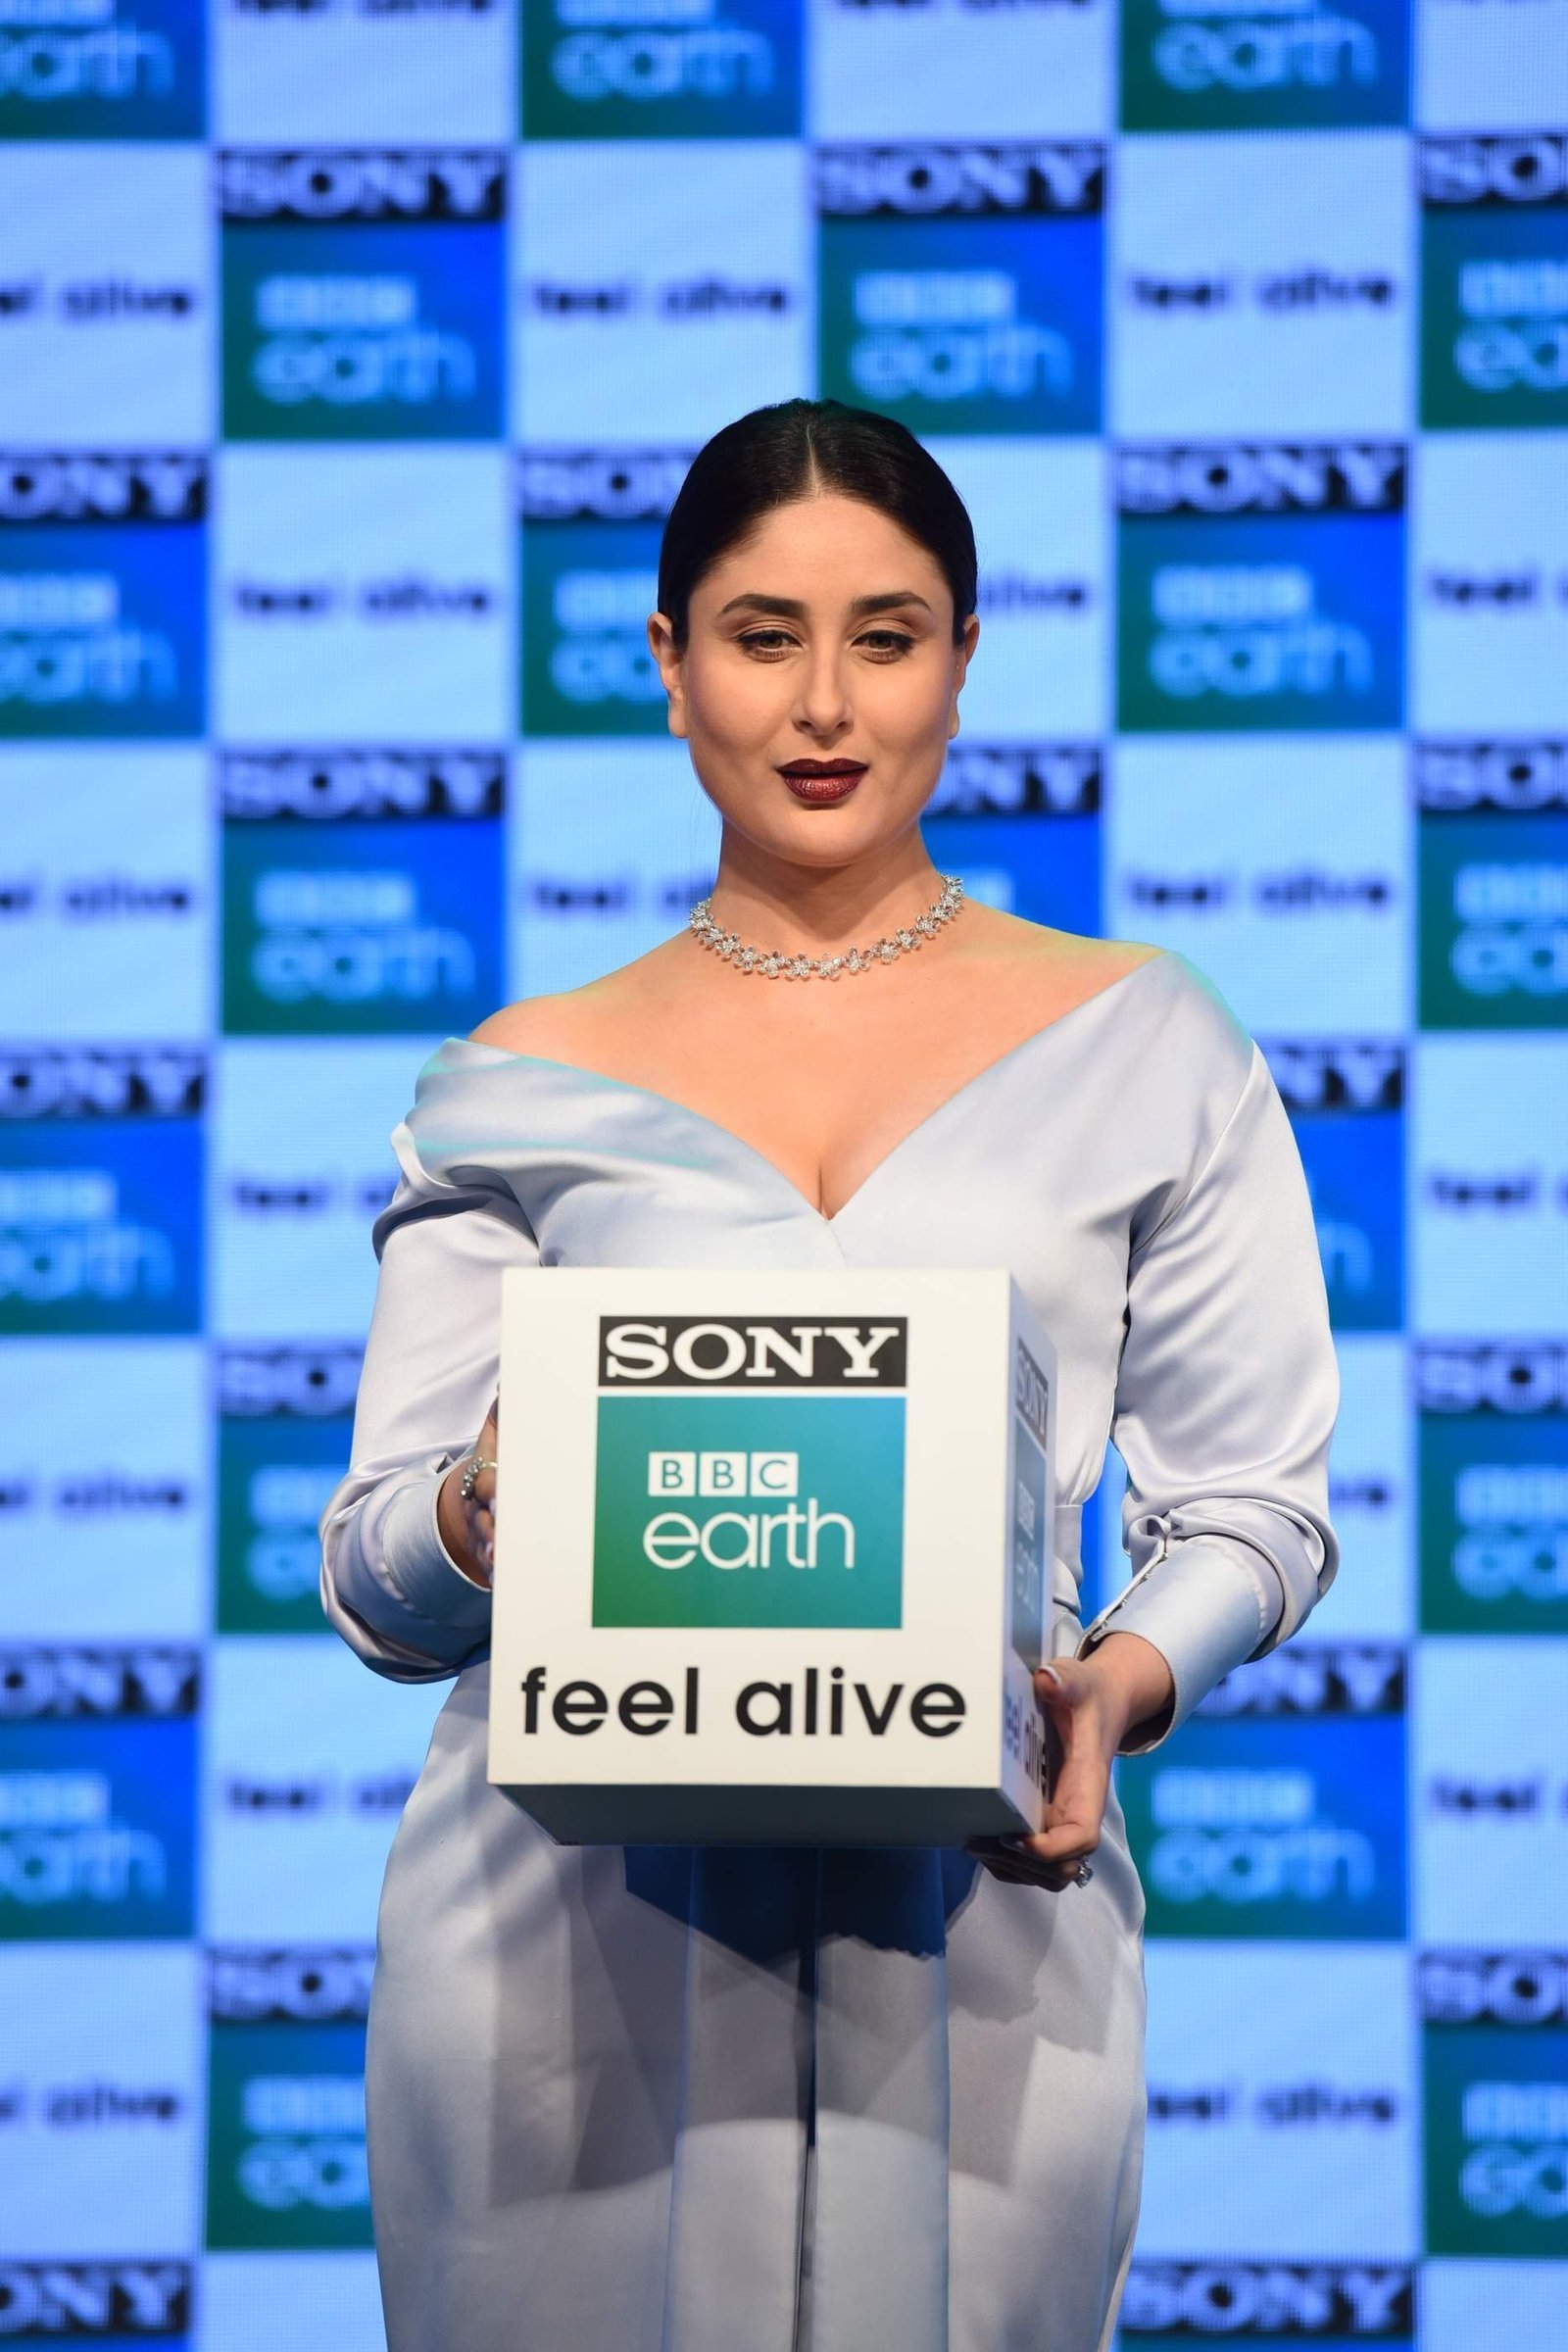 Kareena Kapoor Khan during the launch of a new channel Sony BBC Earth Images | Picture 1477736